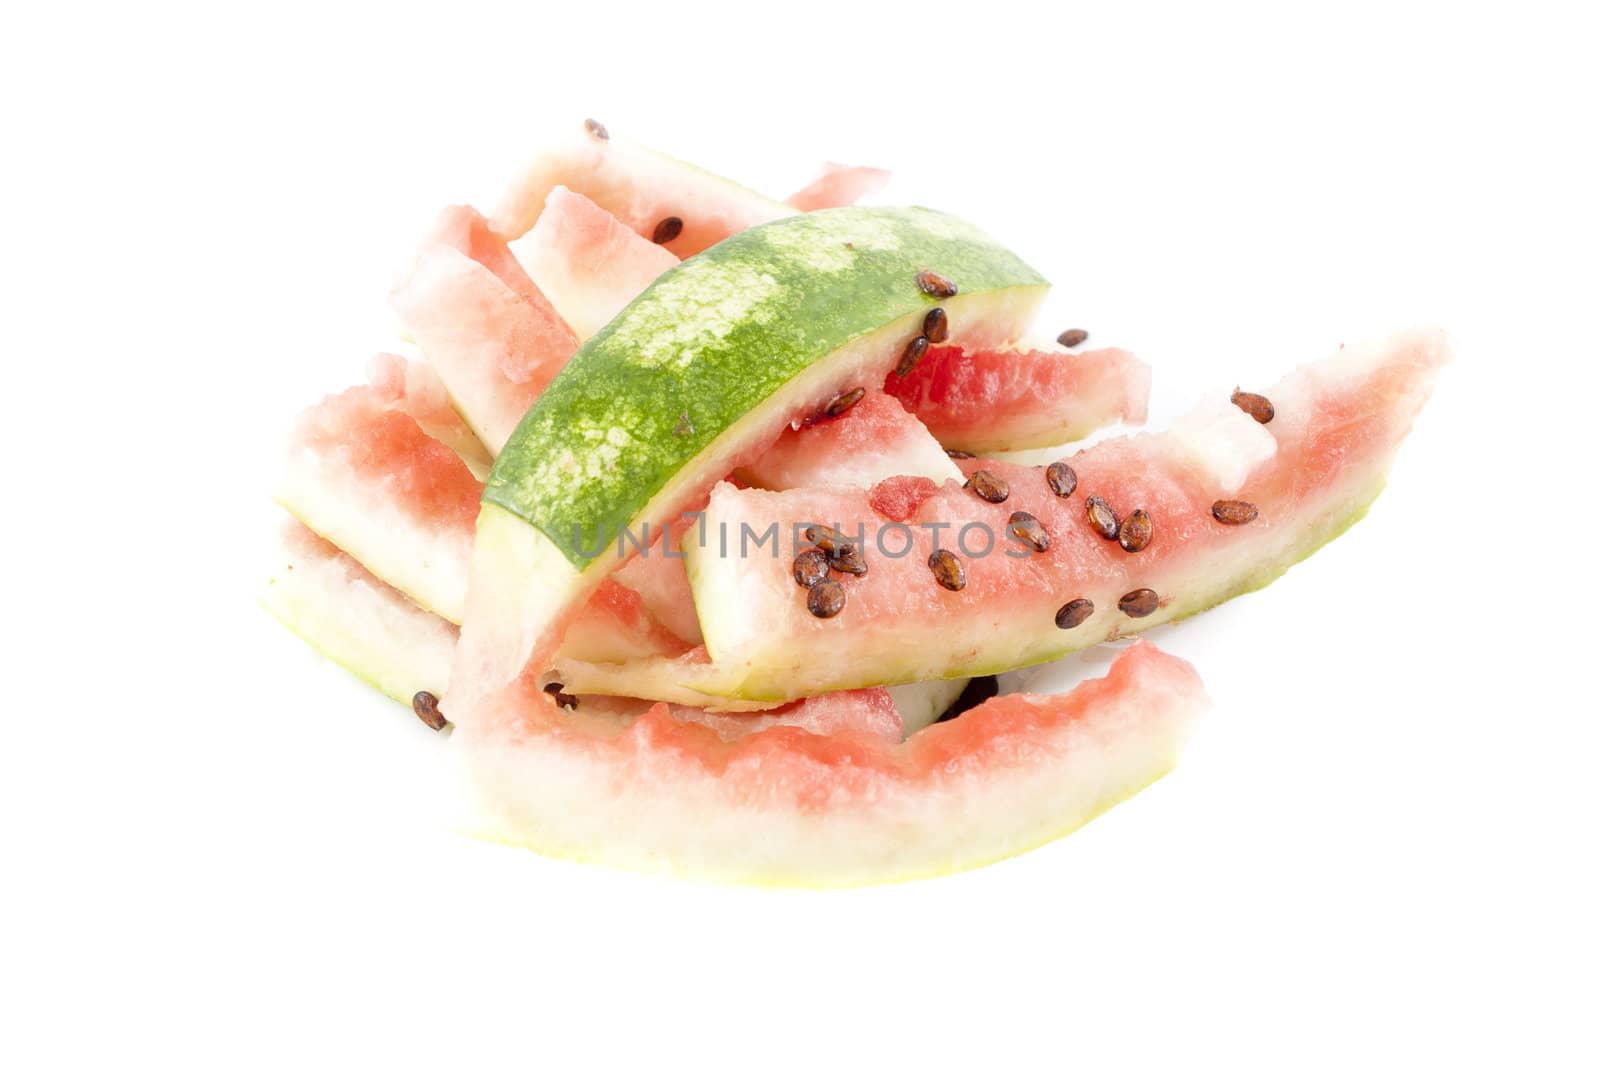 Water-melon on white background